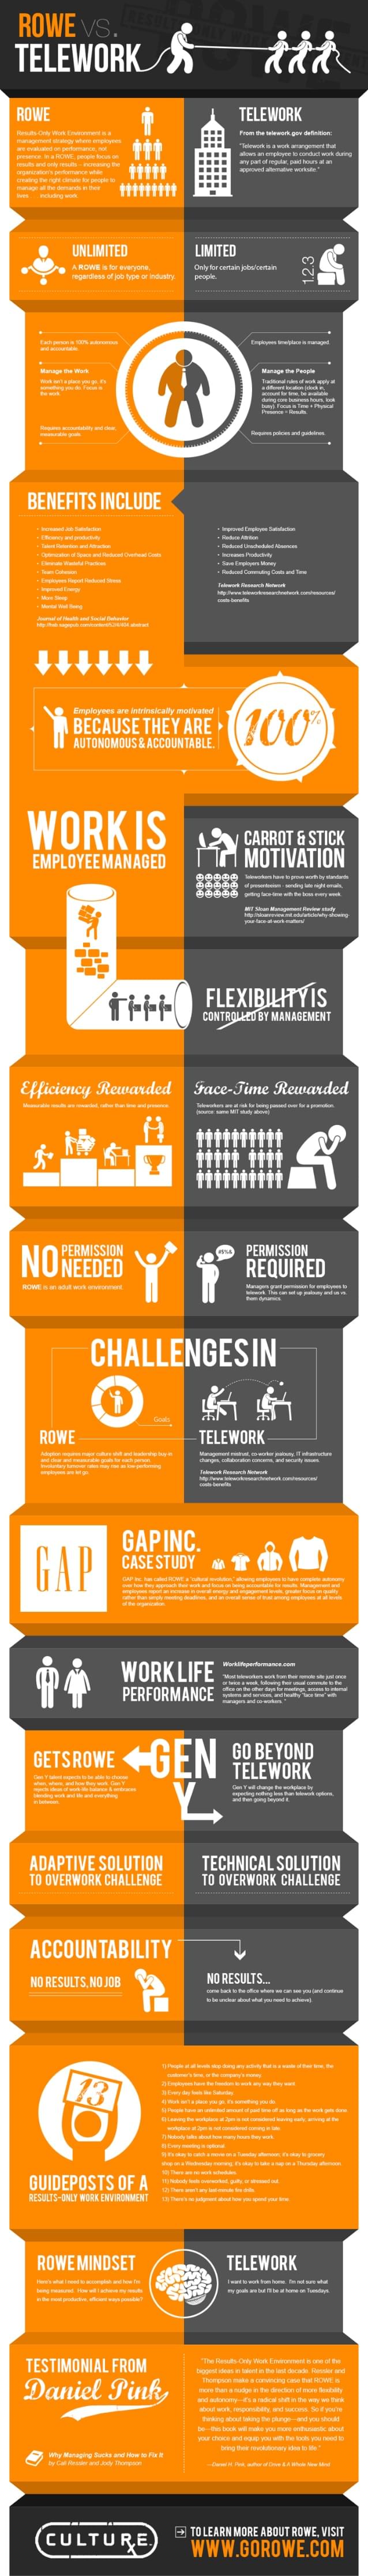 results only work environment infographic